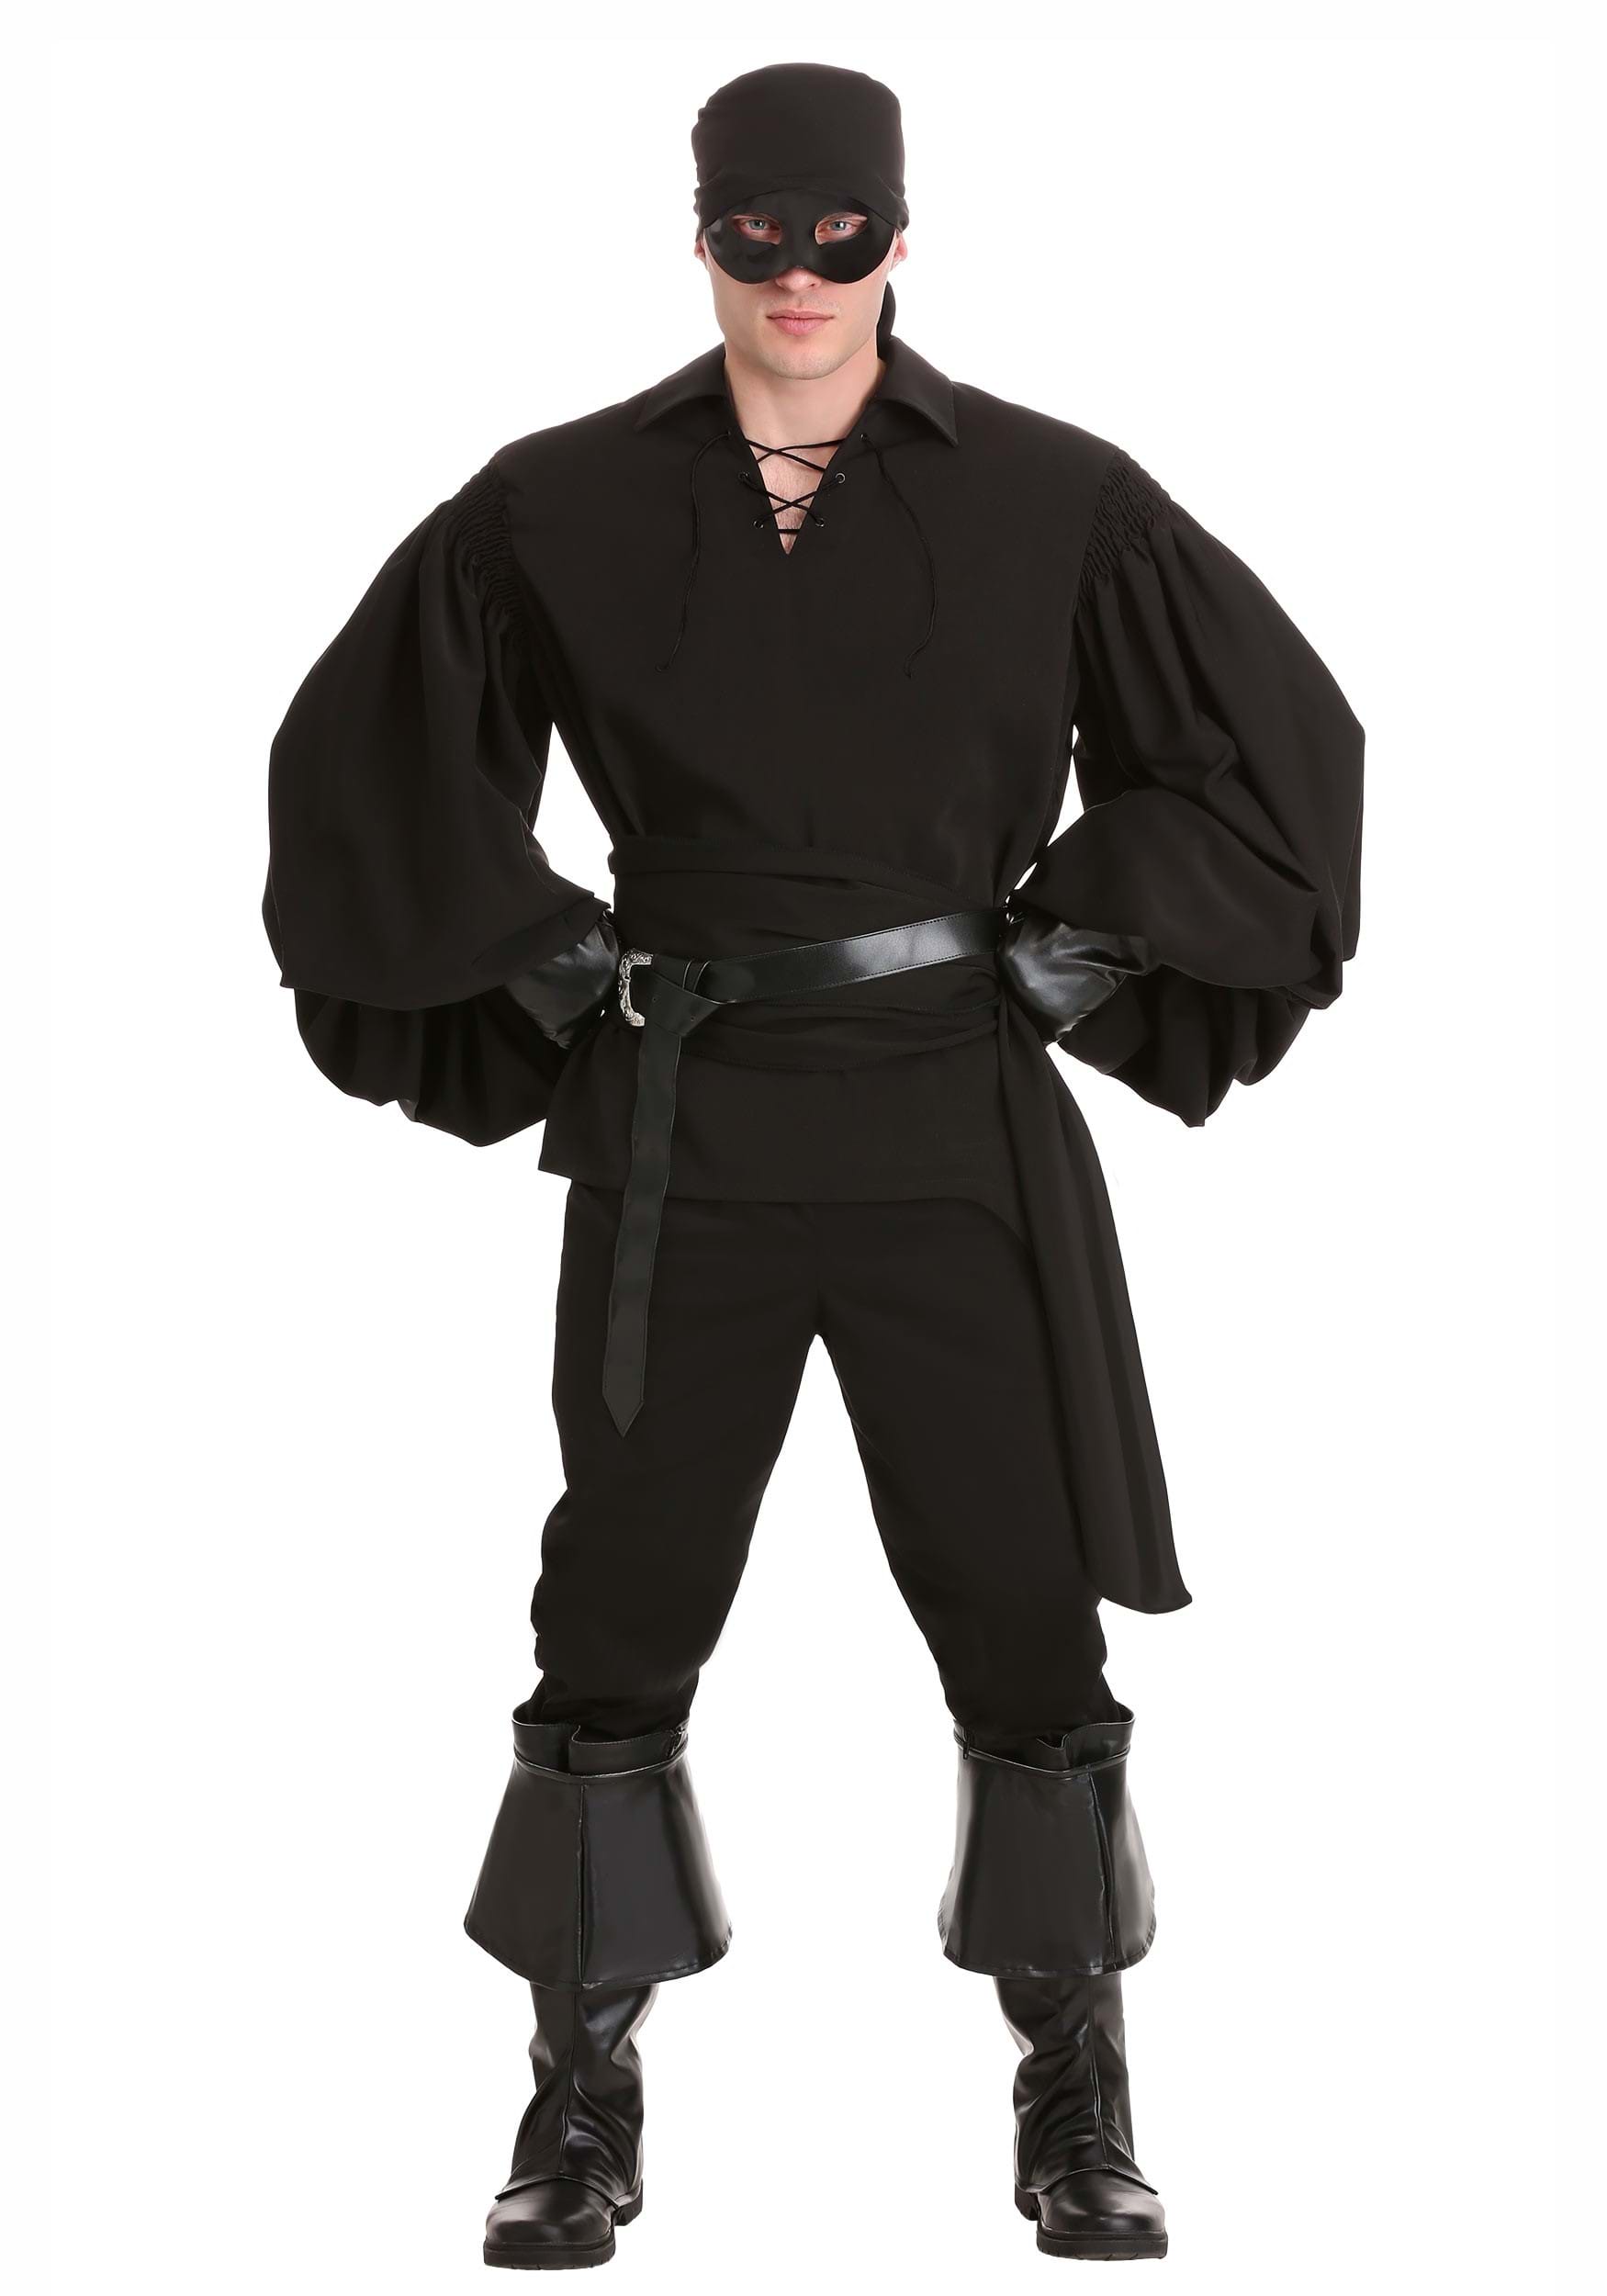 Image of Authentic Westley The Princess Bride Adult Halloween Costume ID FUN7413AD-XS